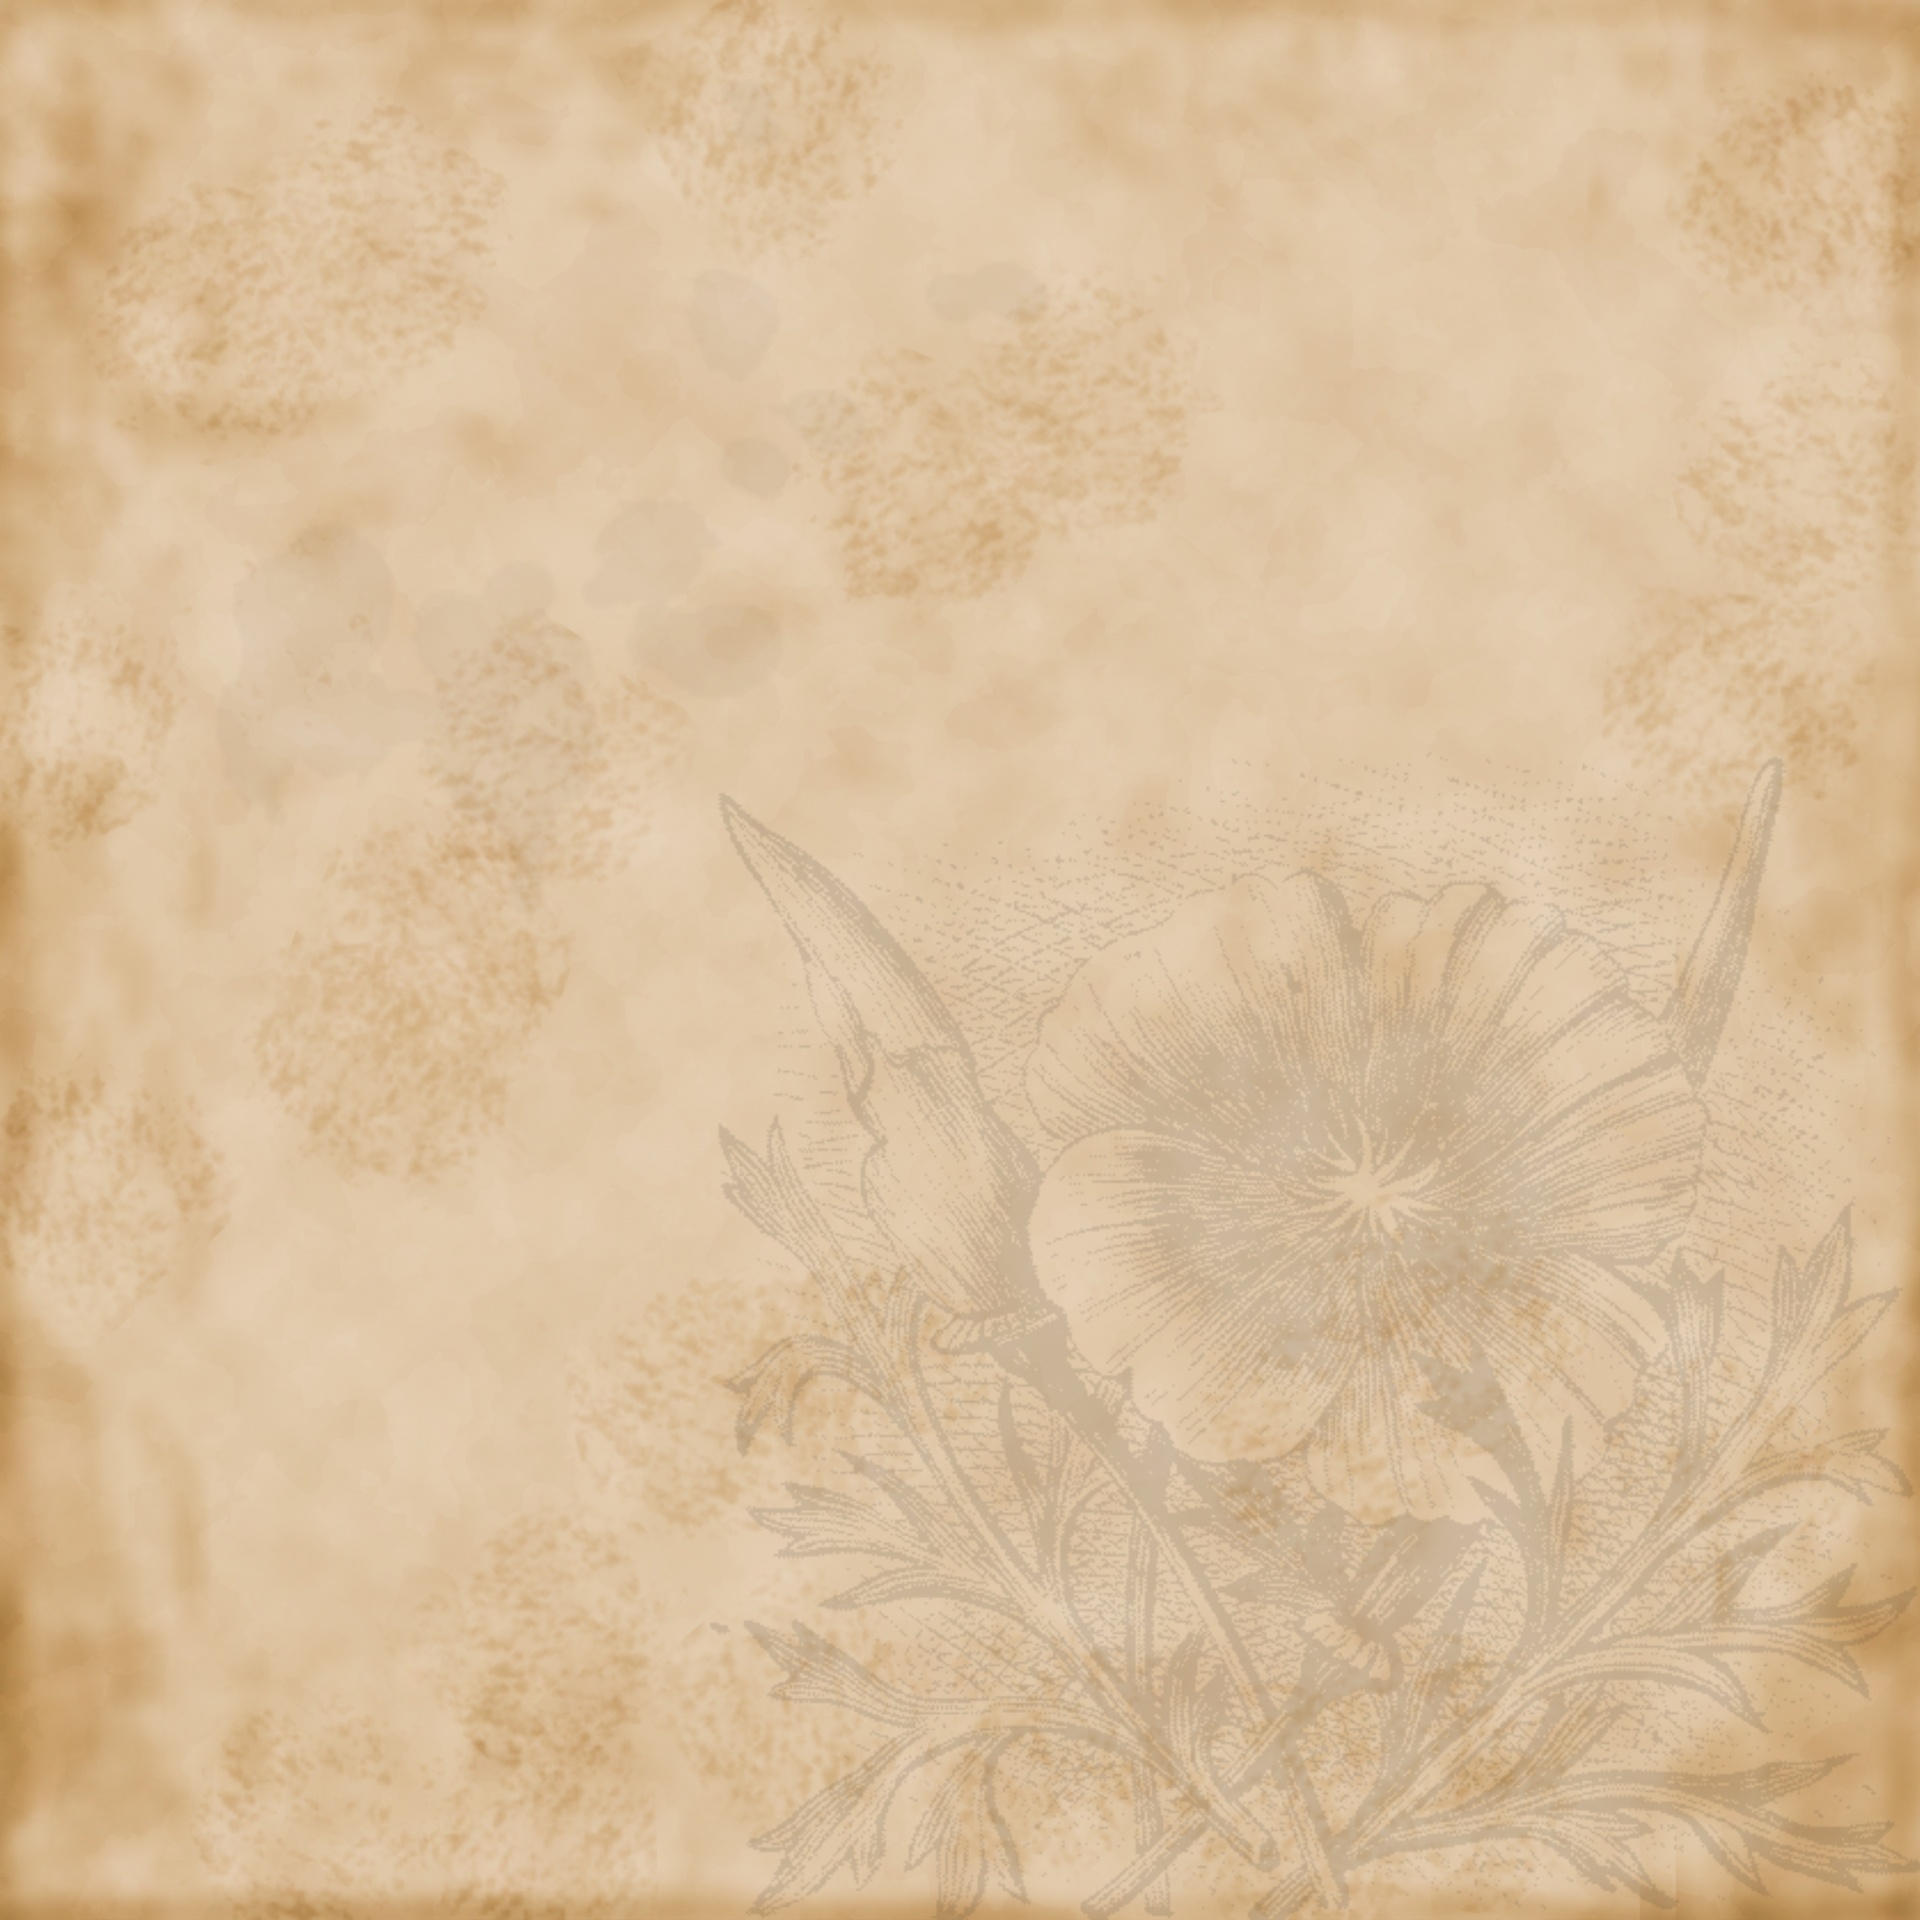 vintage paper note background free photo